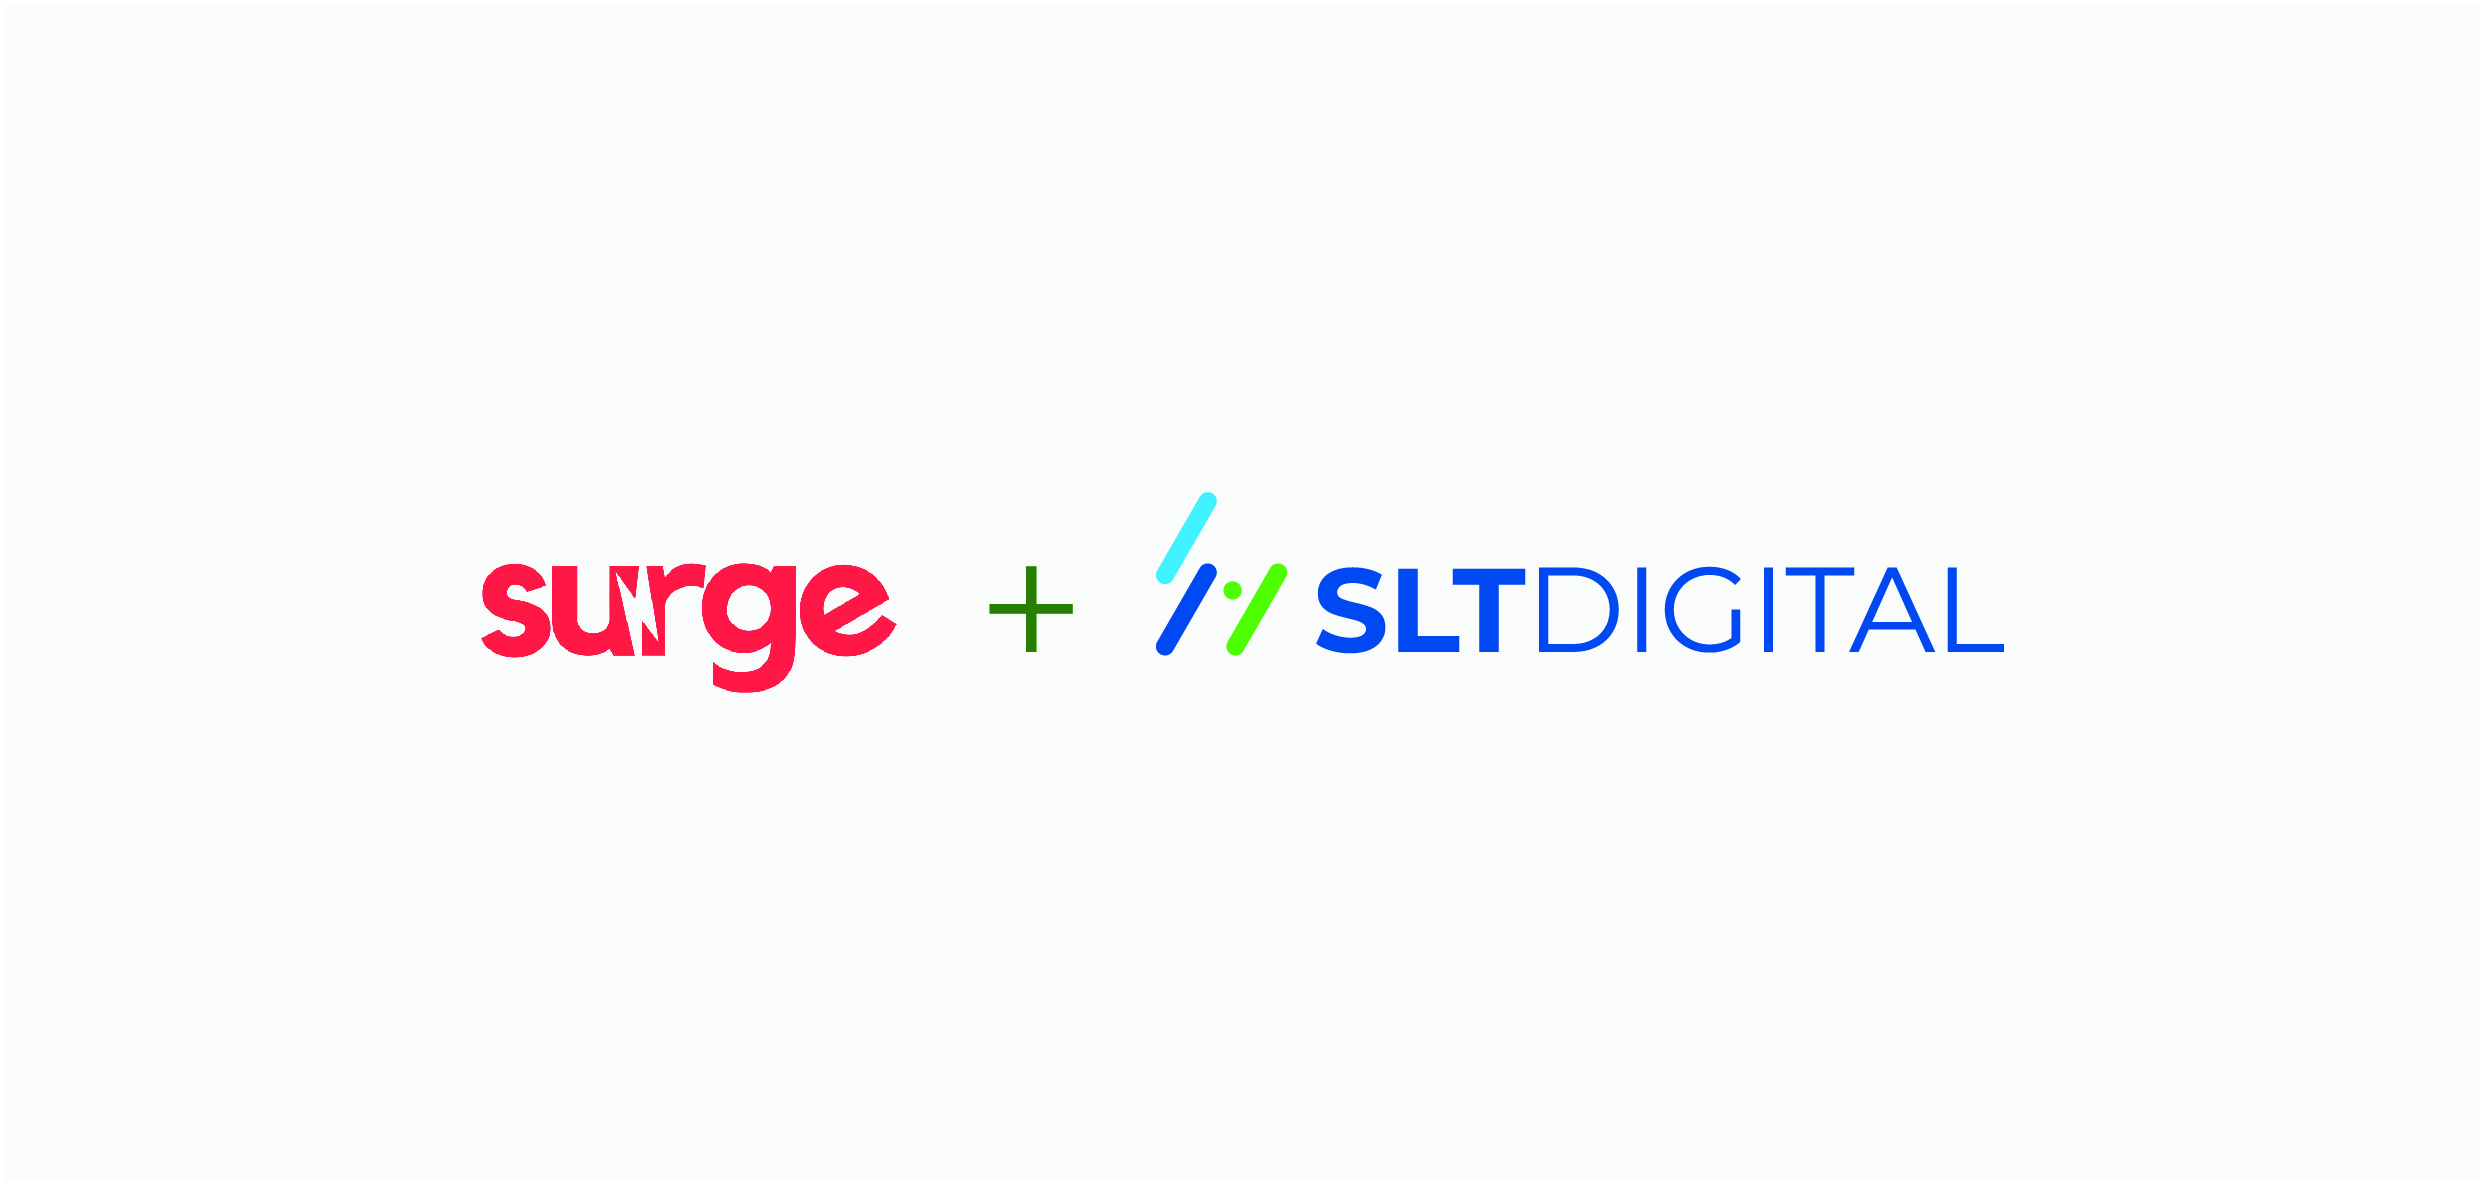 SLT DIGITAL SERVICES and Surge Global forge strategic partnership to propel growth marketing and develop enterprise software solutions